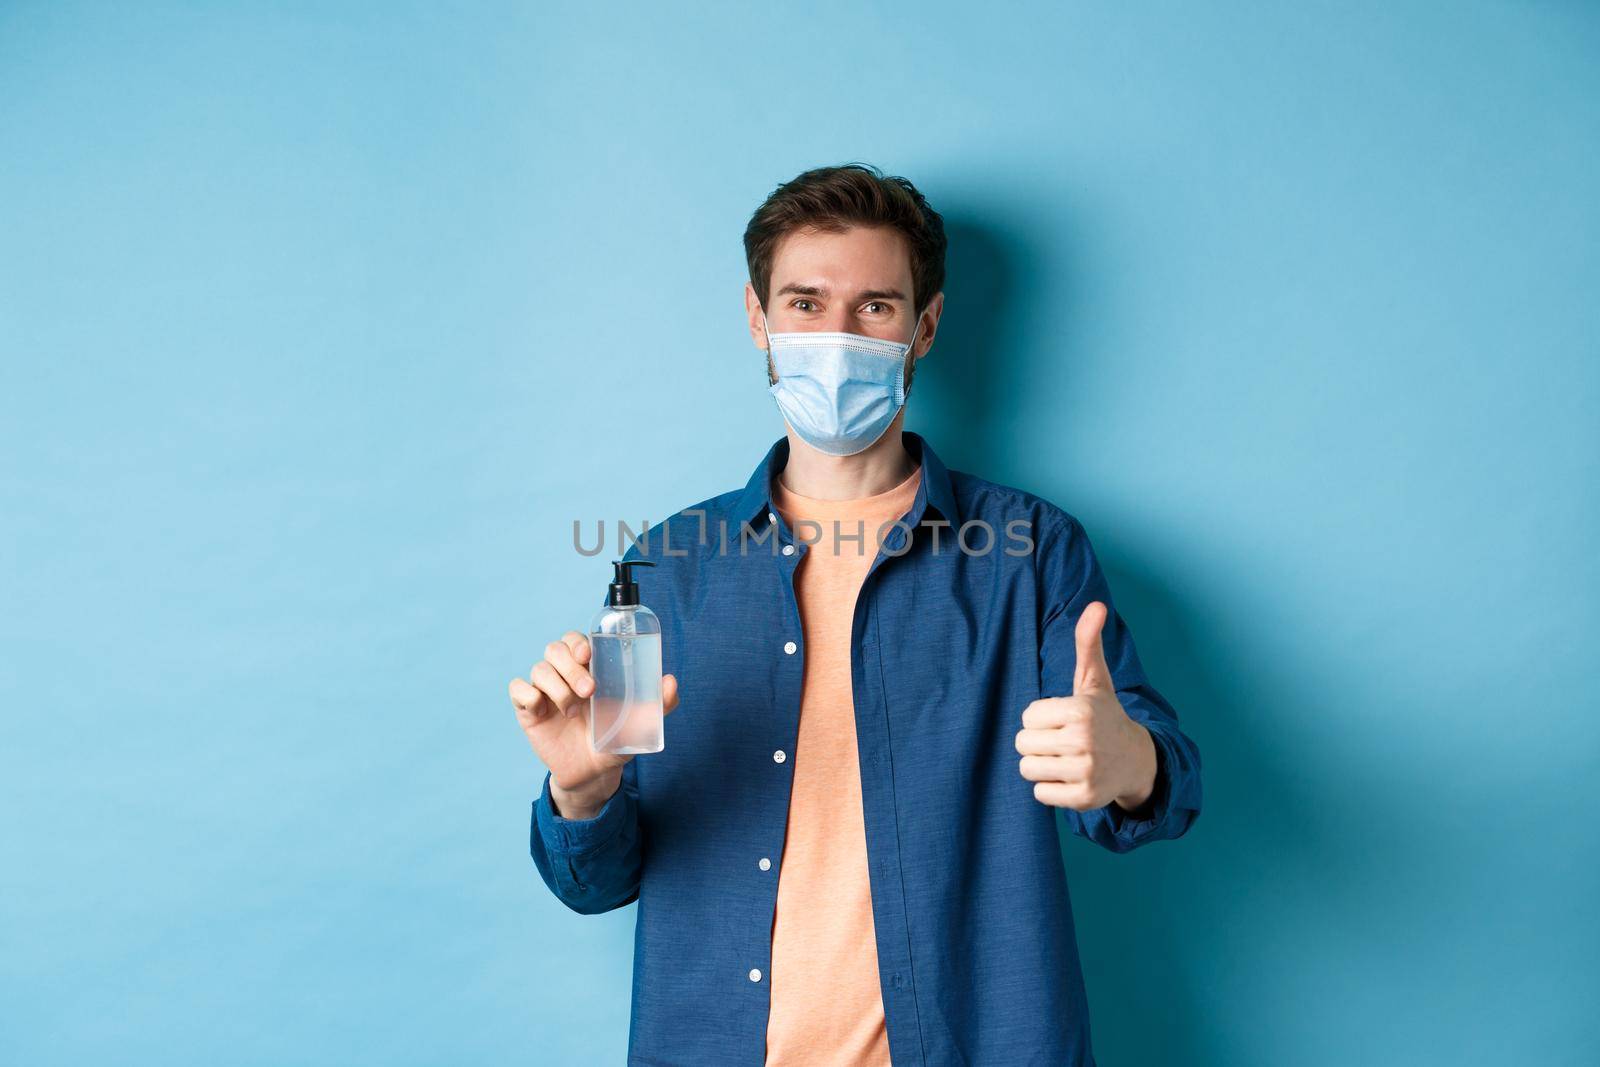 Coronavirus, quarantine and social distancing concept. Happy male model in face mask showing hand sanitizer and thumb up, praise good product, blue background.